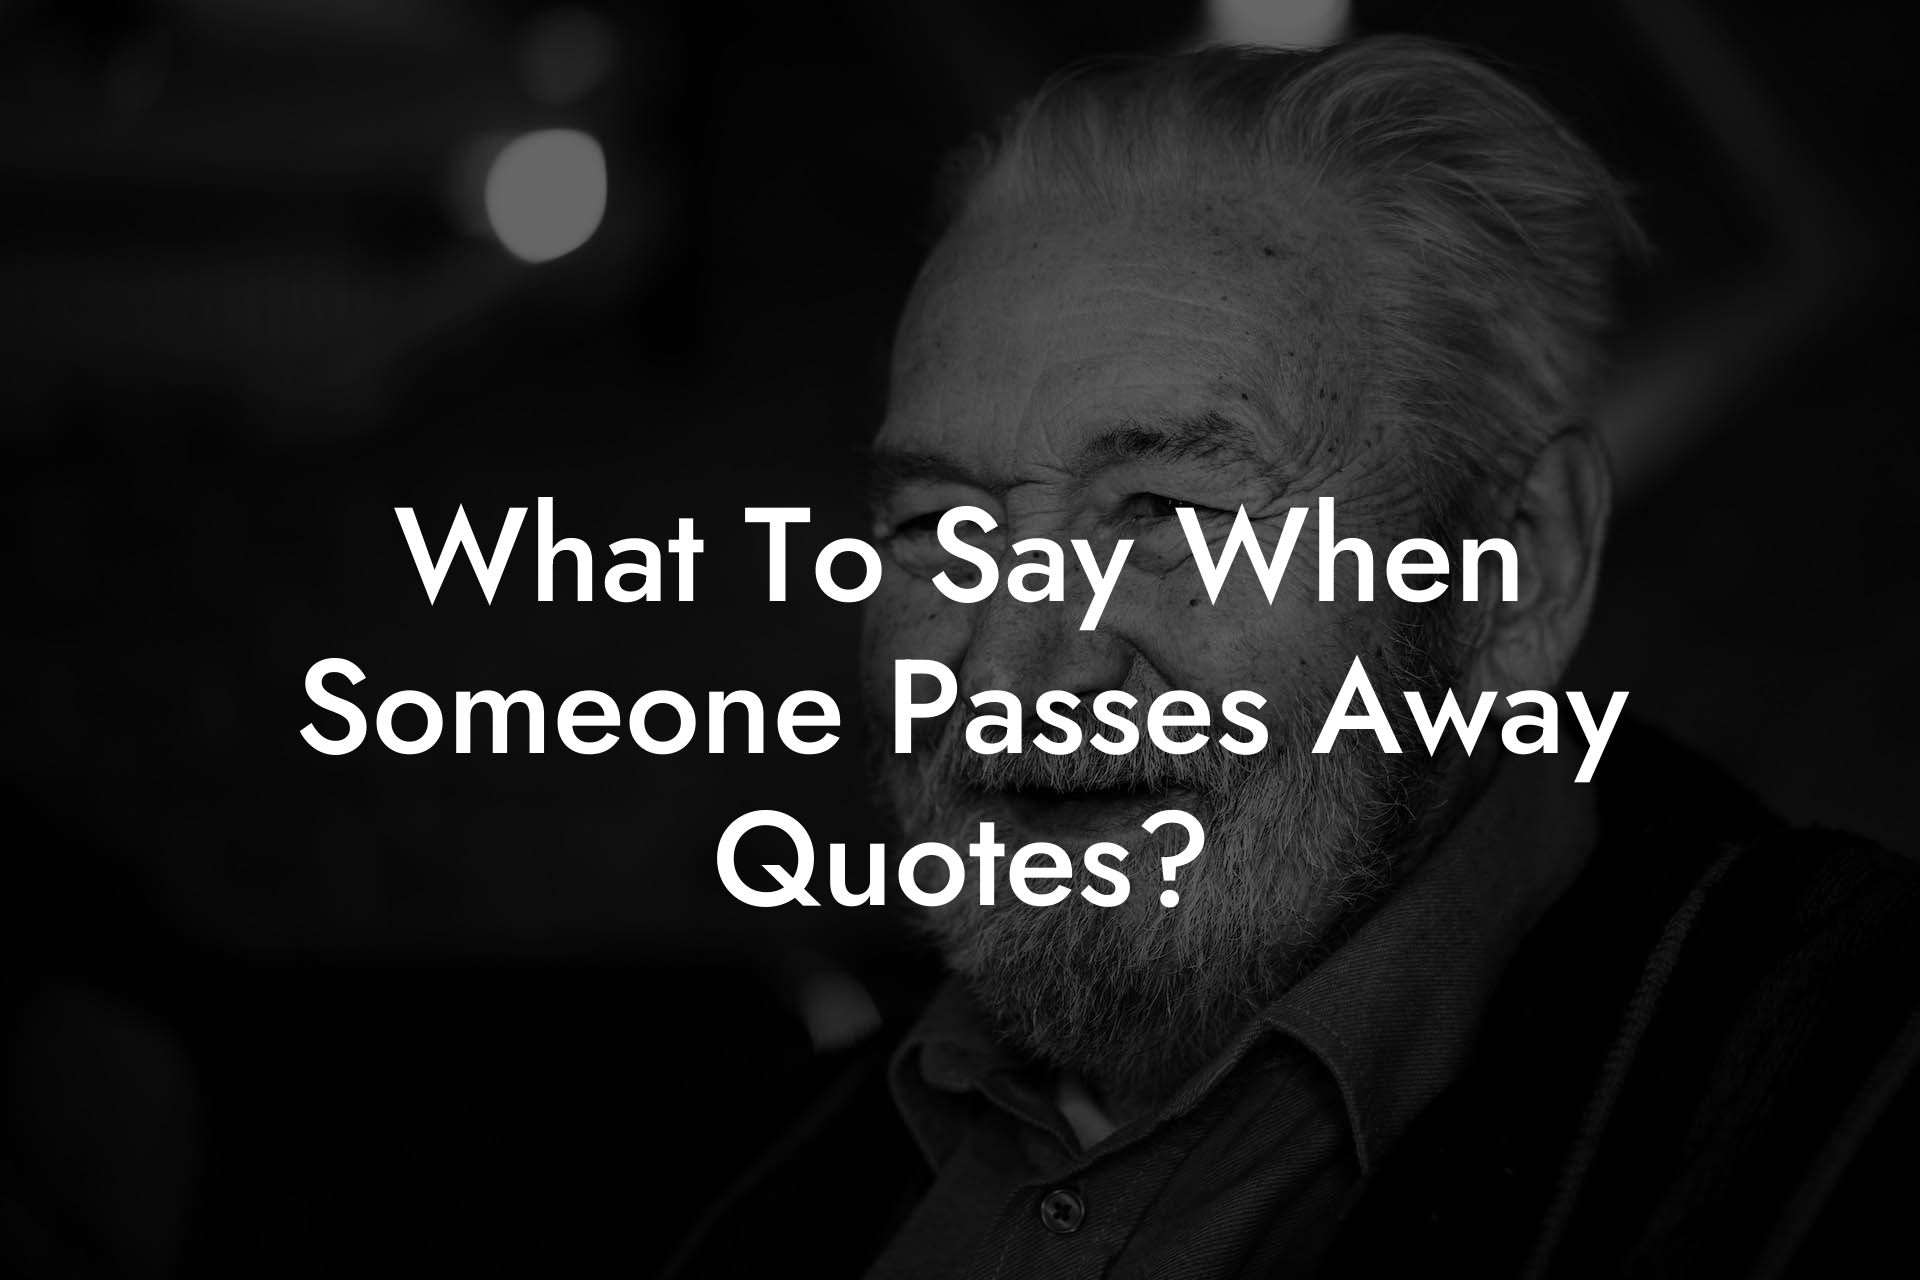 What To Say When Someone Passes Away Quotes?